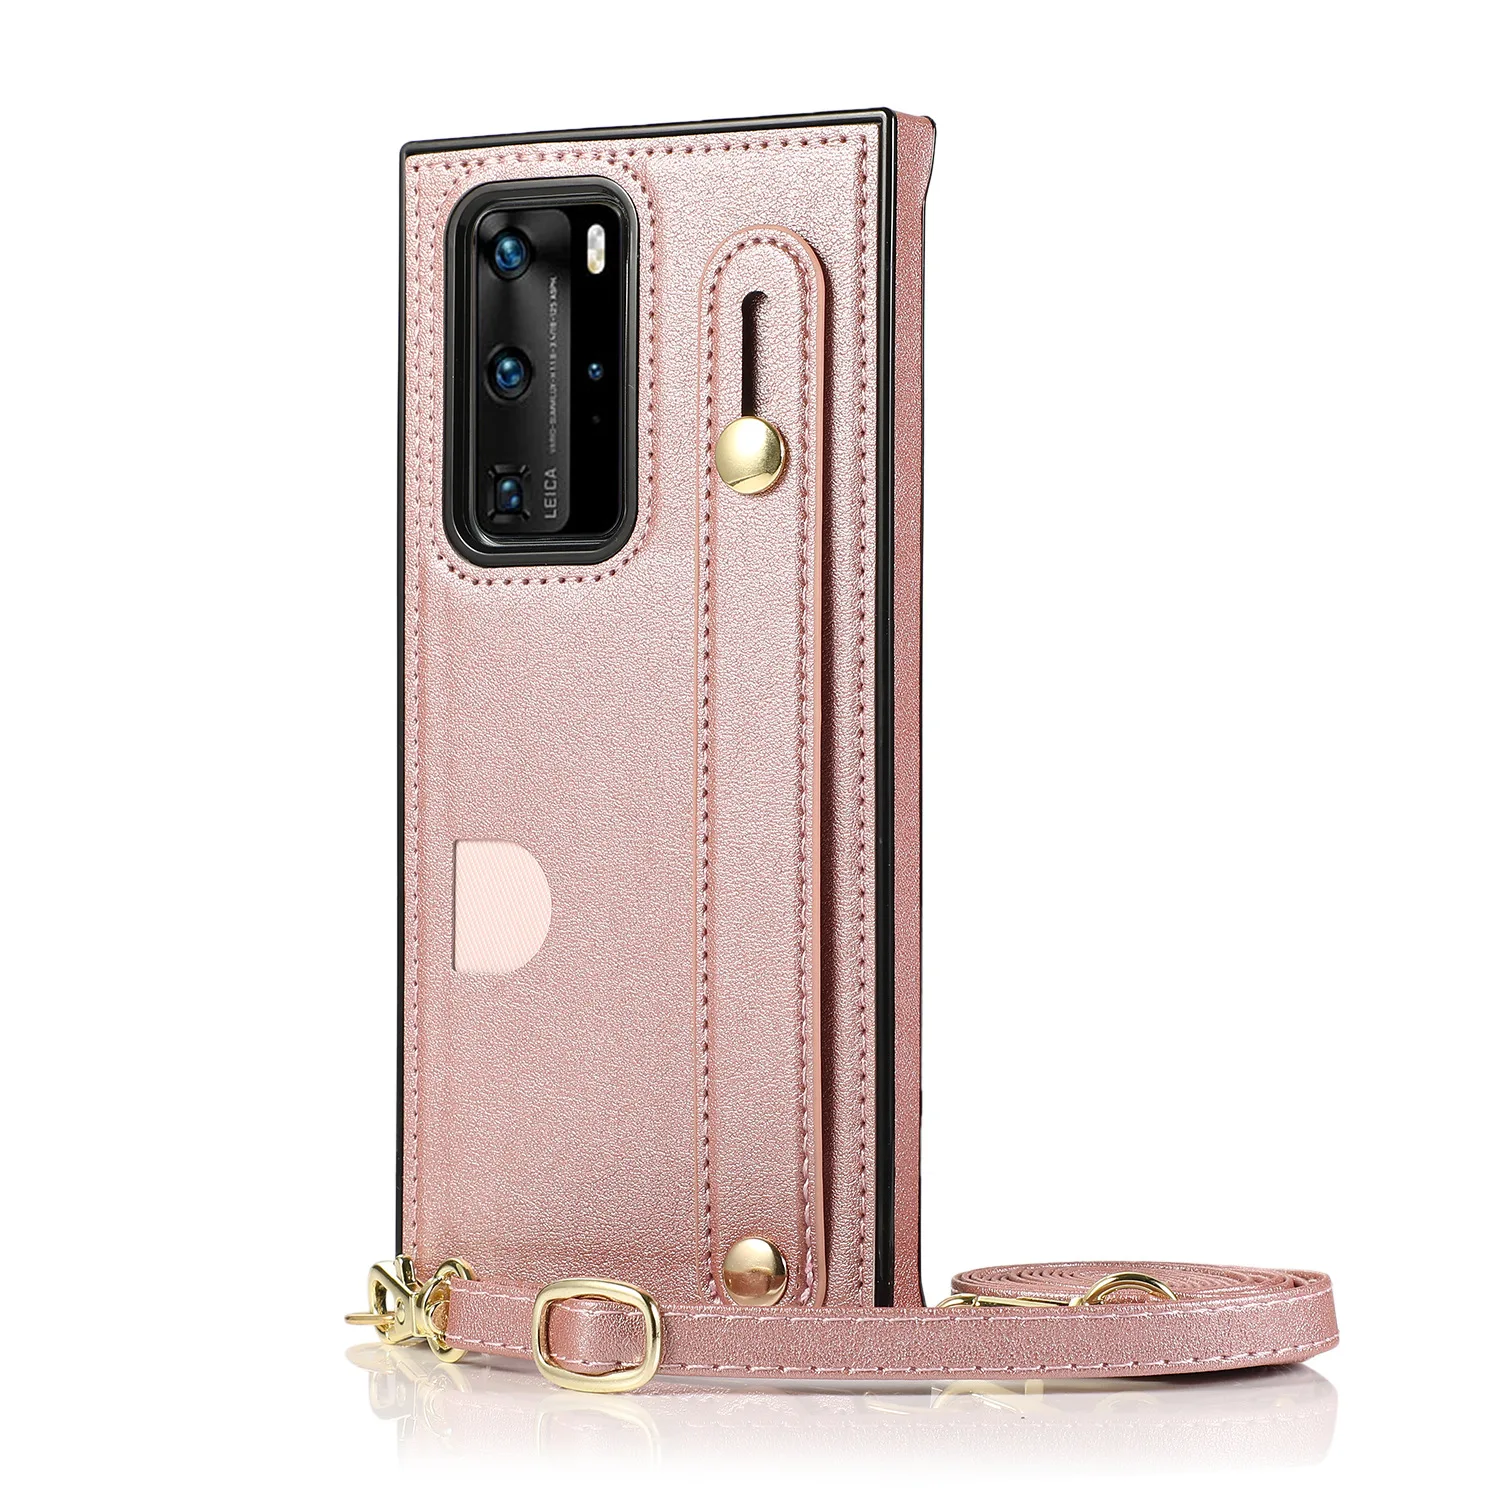 2IN1 Portable Wallet Case For Huawei P40 Pro Plus Full Protection Cover With Strap For Huawei Mate 30 Pro PU Leather Shell